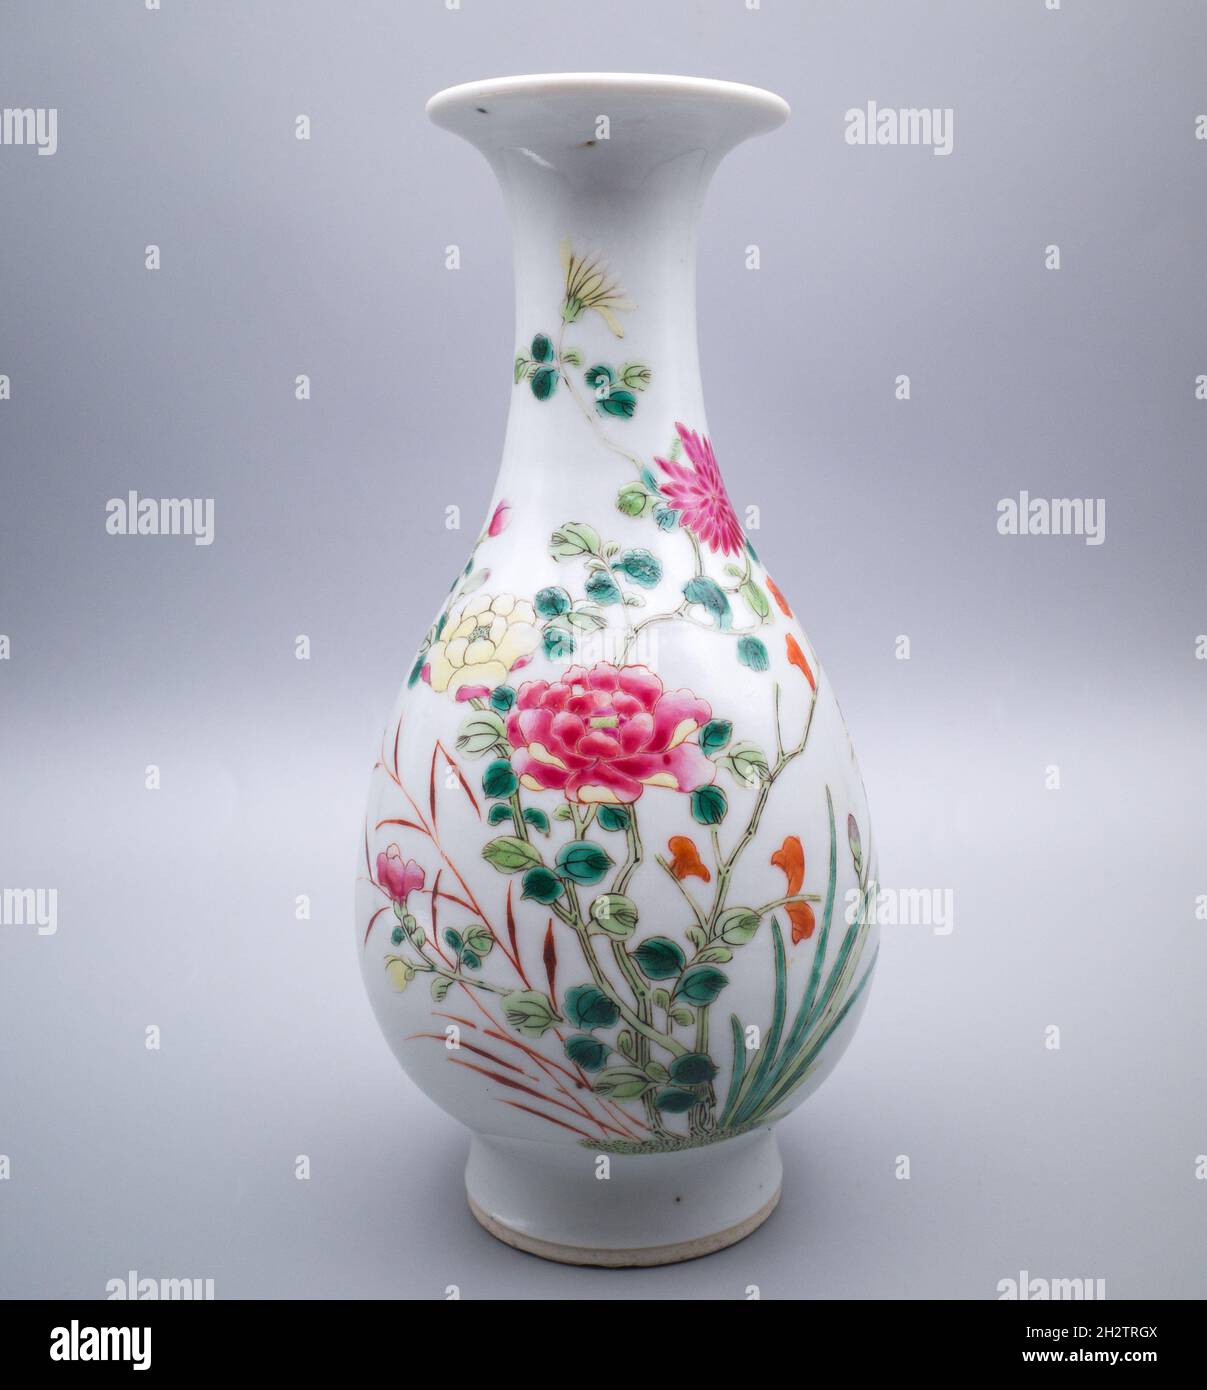 Chinese Famille Rose Porcelain Pear Shaped Vase With Floral Decoration Stock Photo